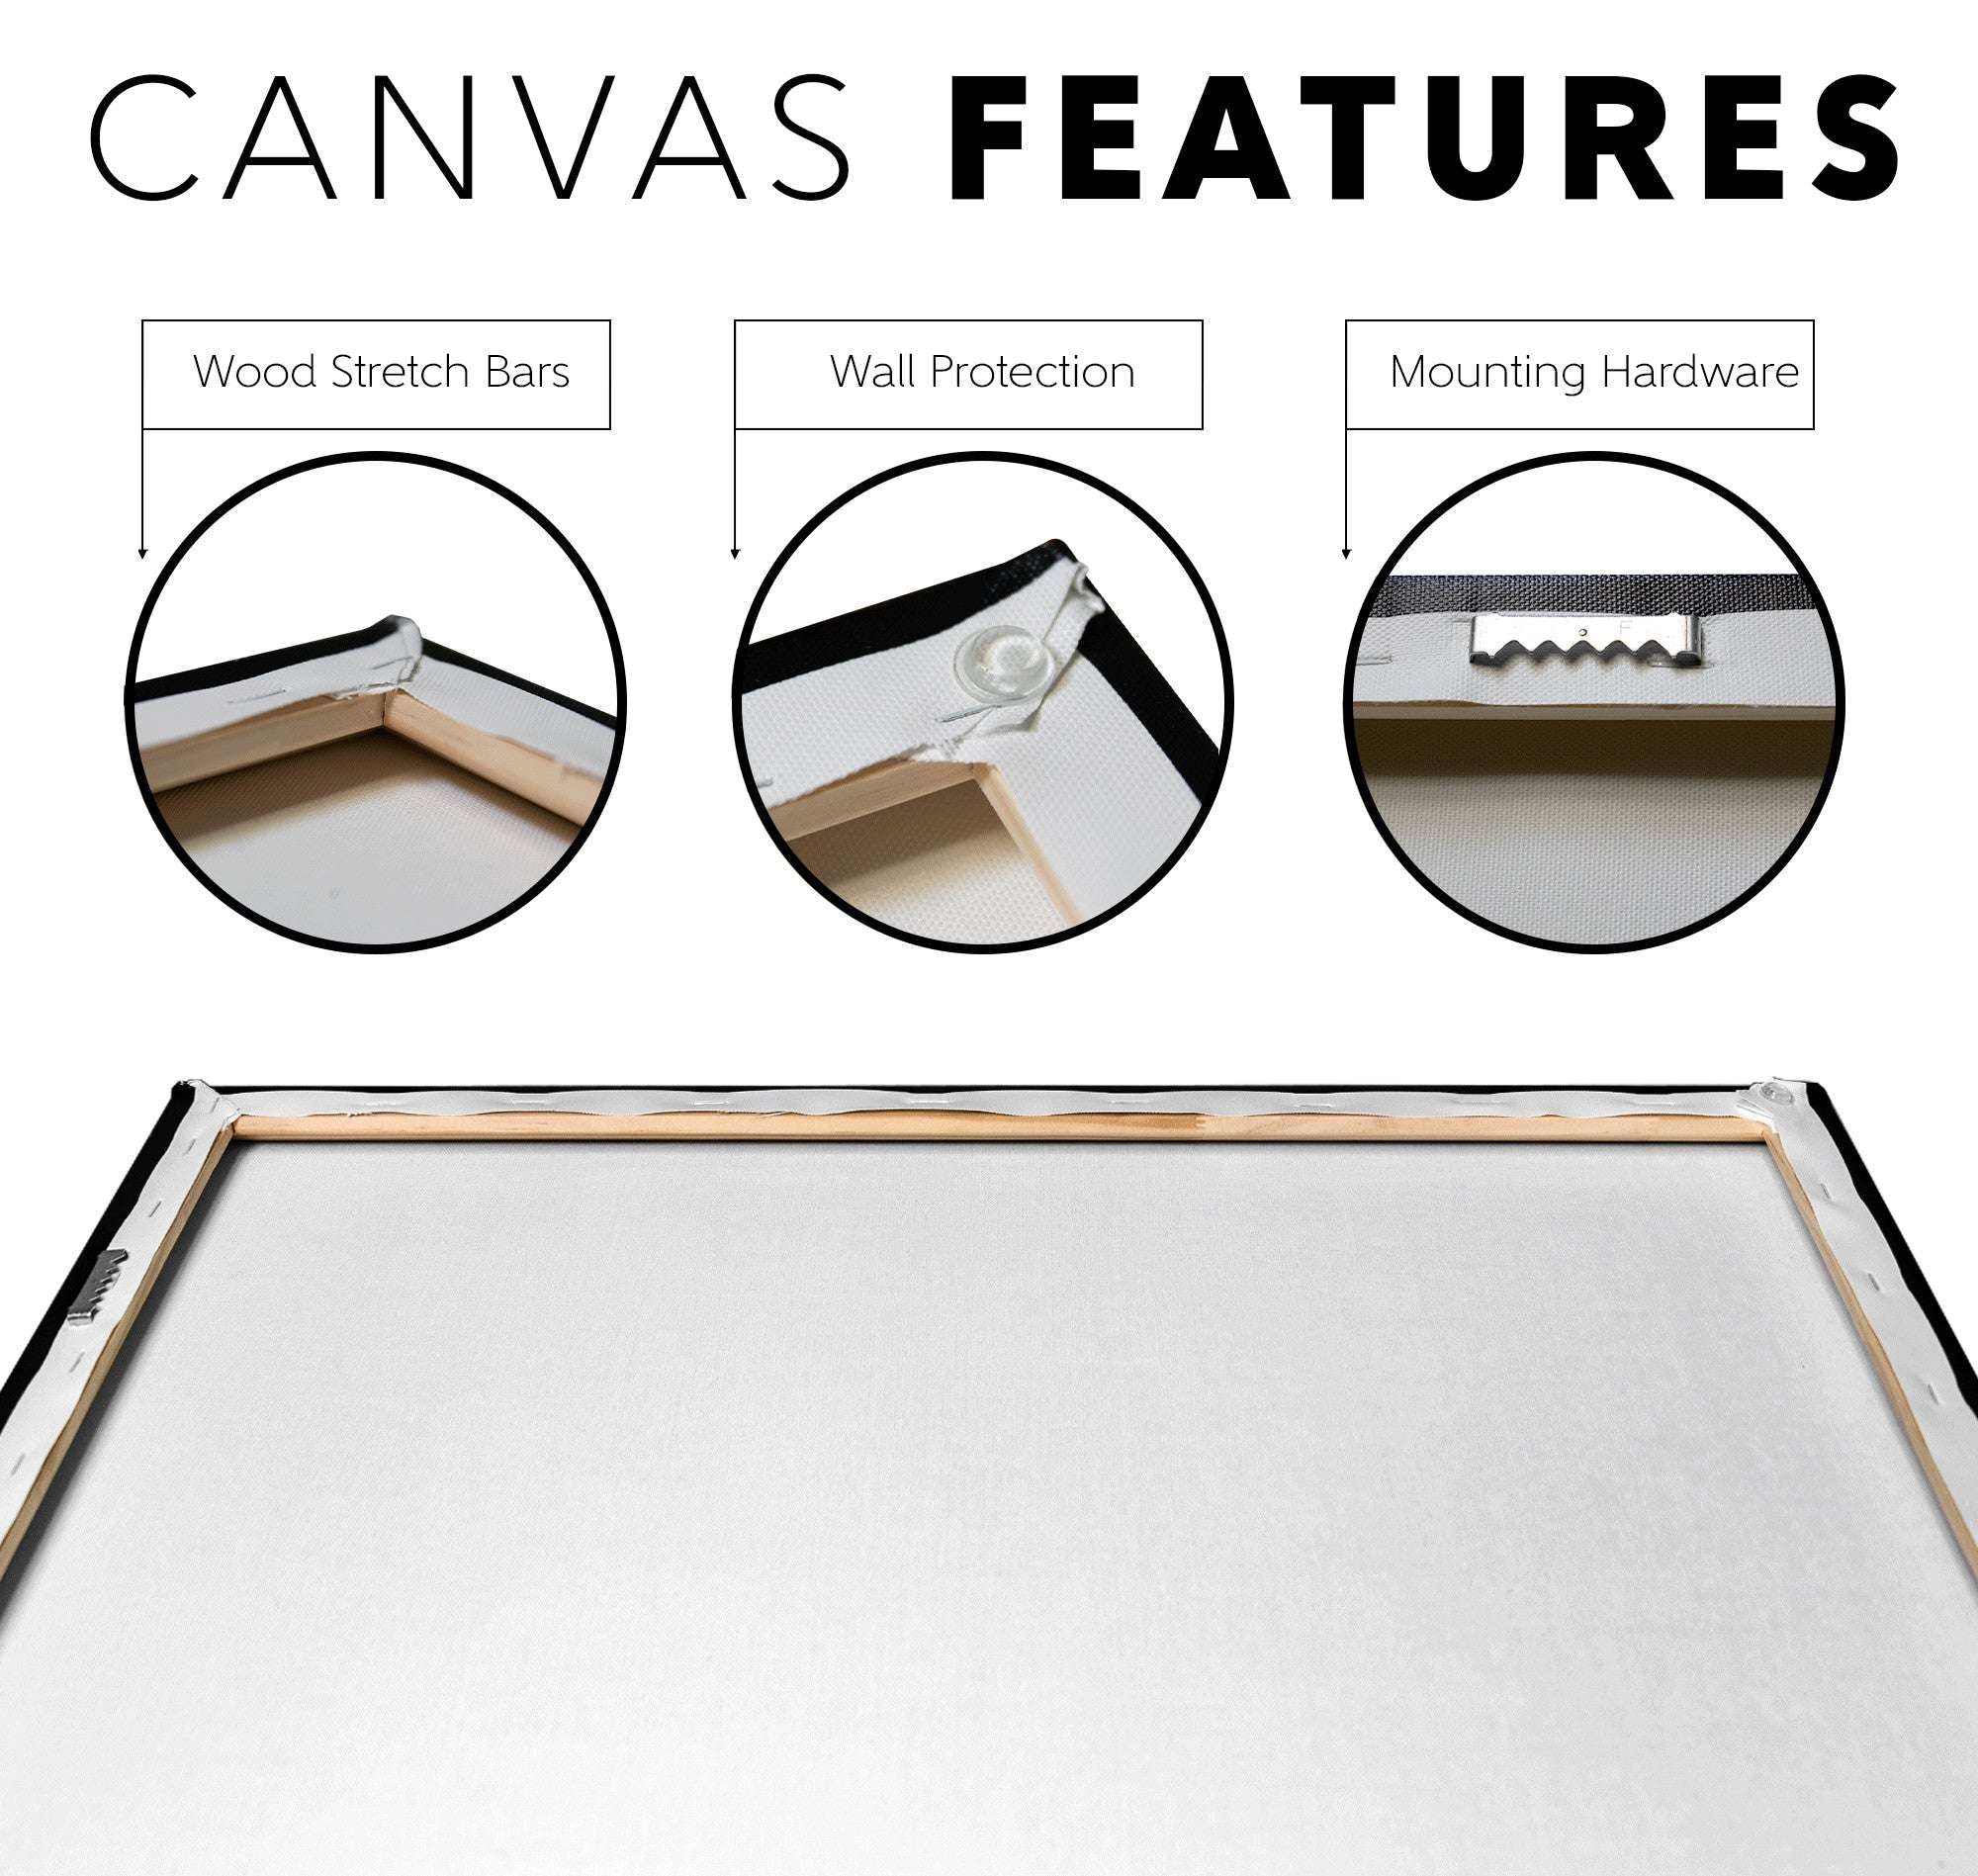 Diagram showing features of a Canvas Art Print including wood stretch bars, wall protection, and mounting hardware. the canvas is viewed from the back.